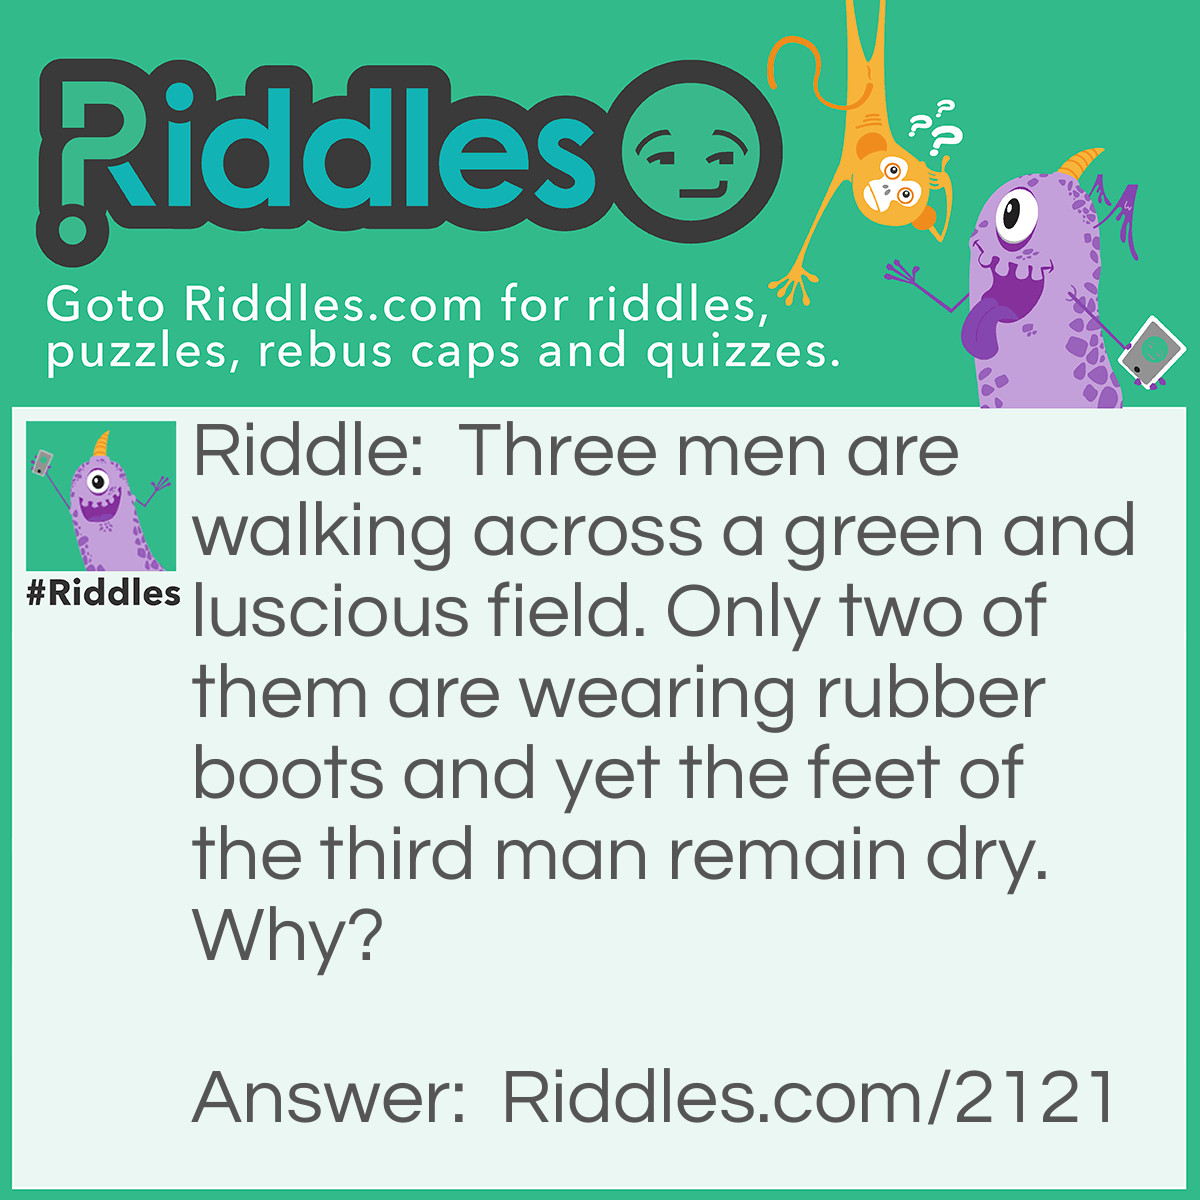 Riddle: Three men are walking across a green and luscious field. Only two of them are wearing rubber boots and yet the feet of the third man remain dry. Why? Answer: The ground is not wet!